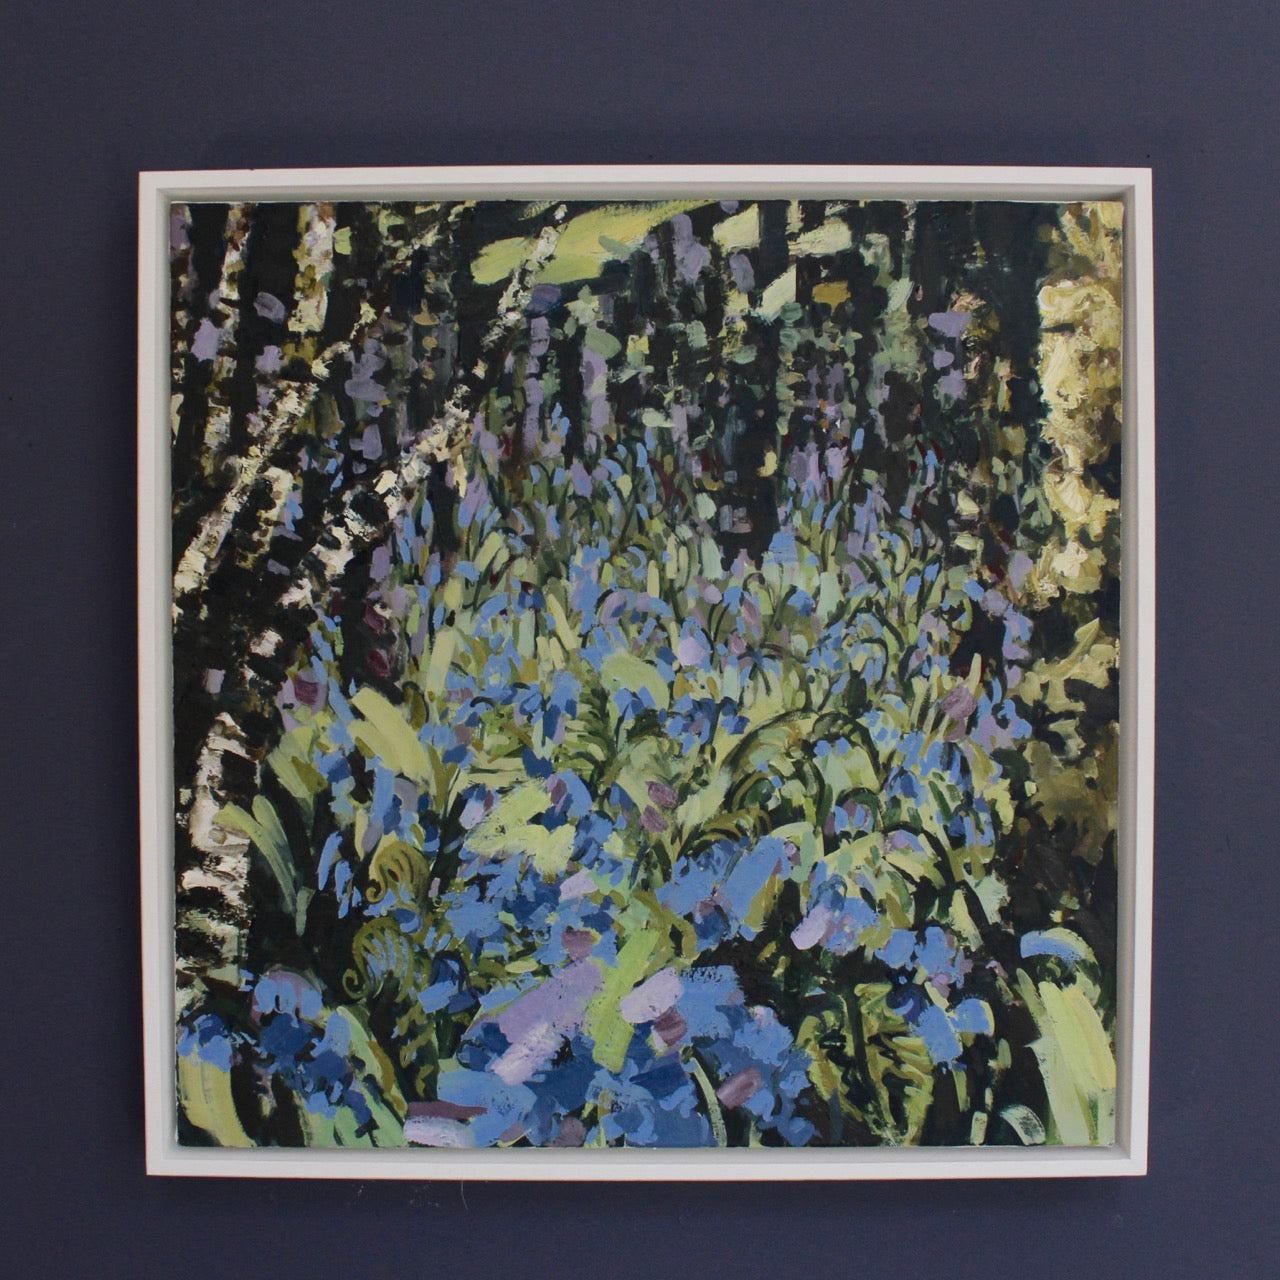 Jill Hudson, 'Bluebell Riot' an abstract painting of purple and blue bluebells in a wood - framed on a dark wall